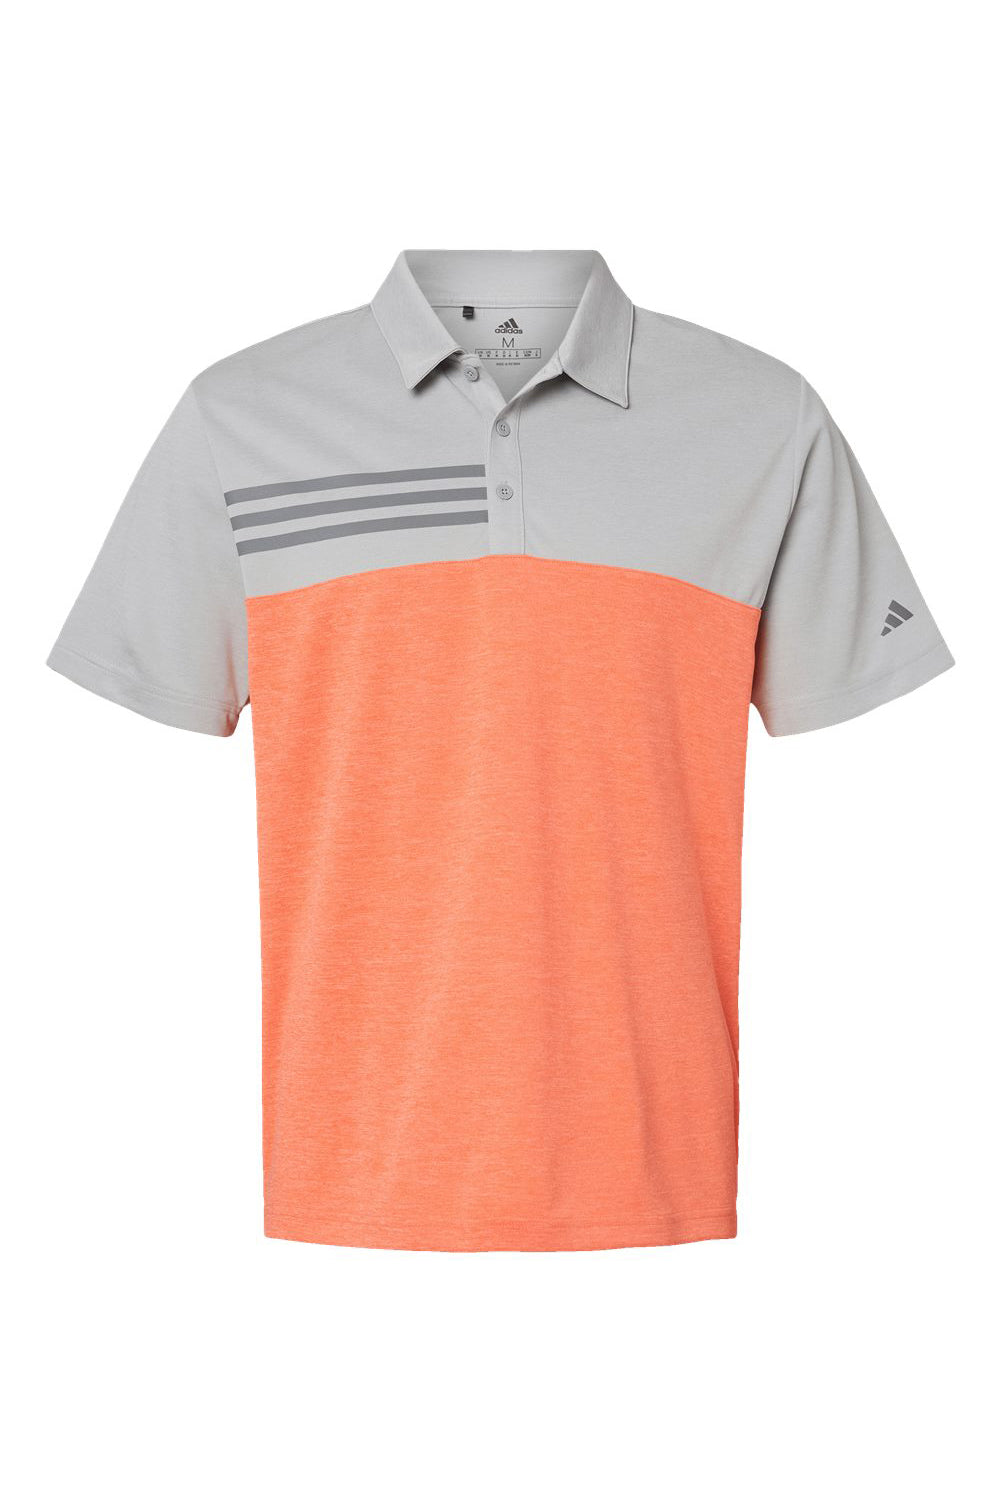 Adidas A508 Mens 3 Stripes Colorblock UPF 50+ Short Sleeve Polo Shirt Heather Grey/Heather Coral Flat Front